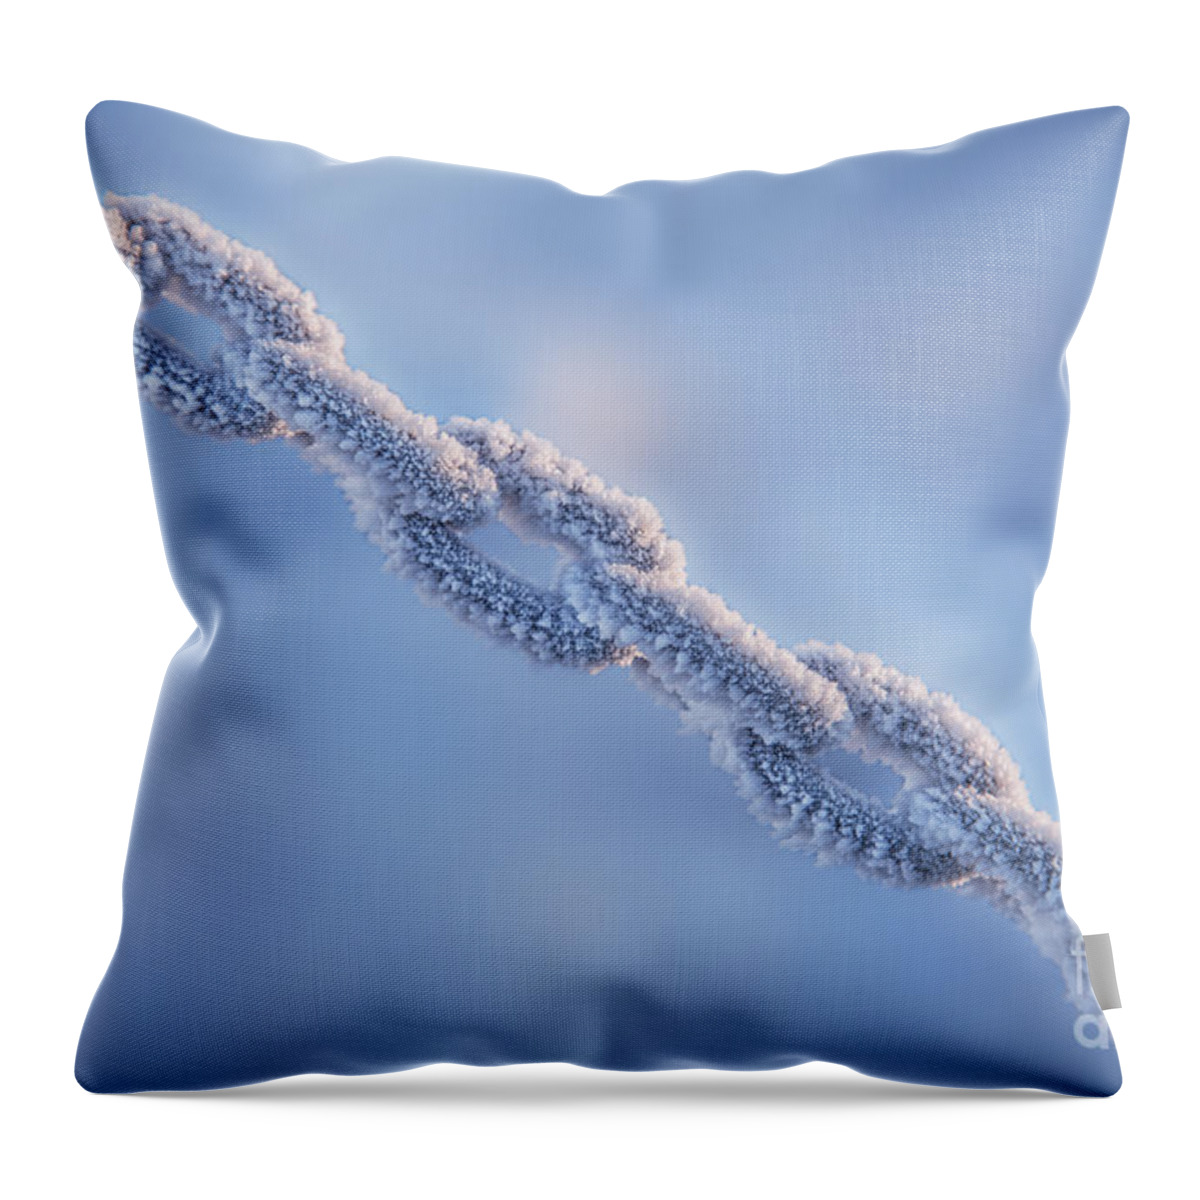 Chain Throw Pillow featuring the photograph Chain Reaction by Evelina Kremsdorf